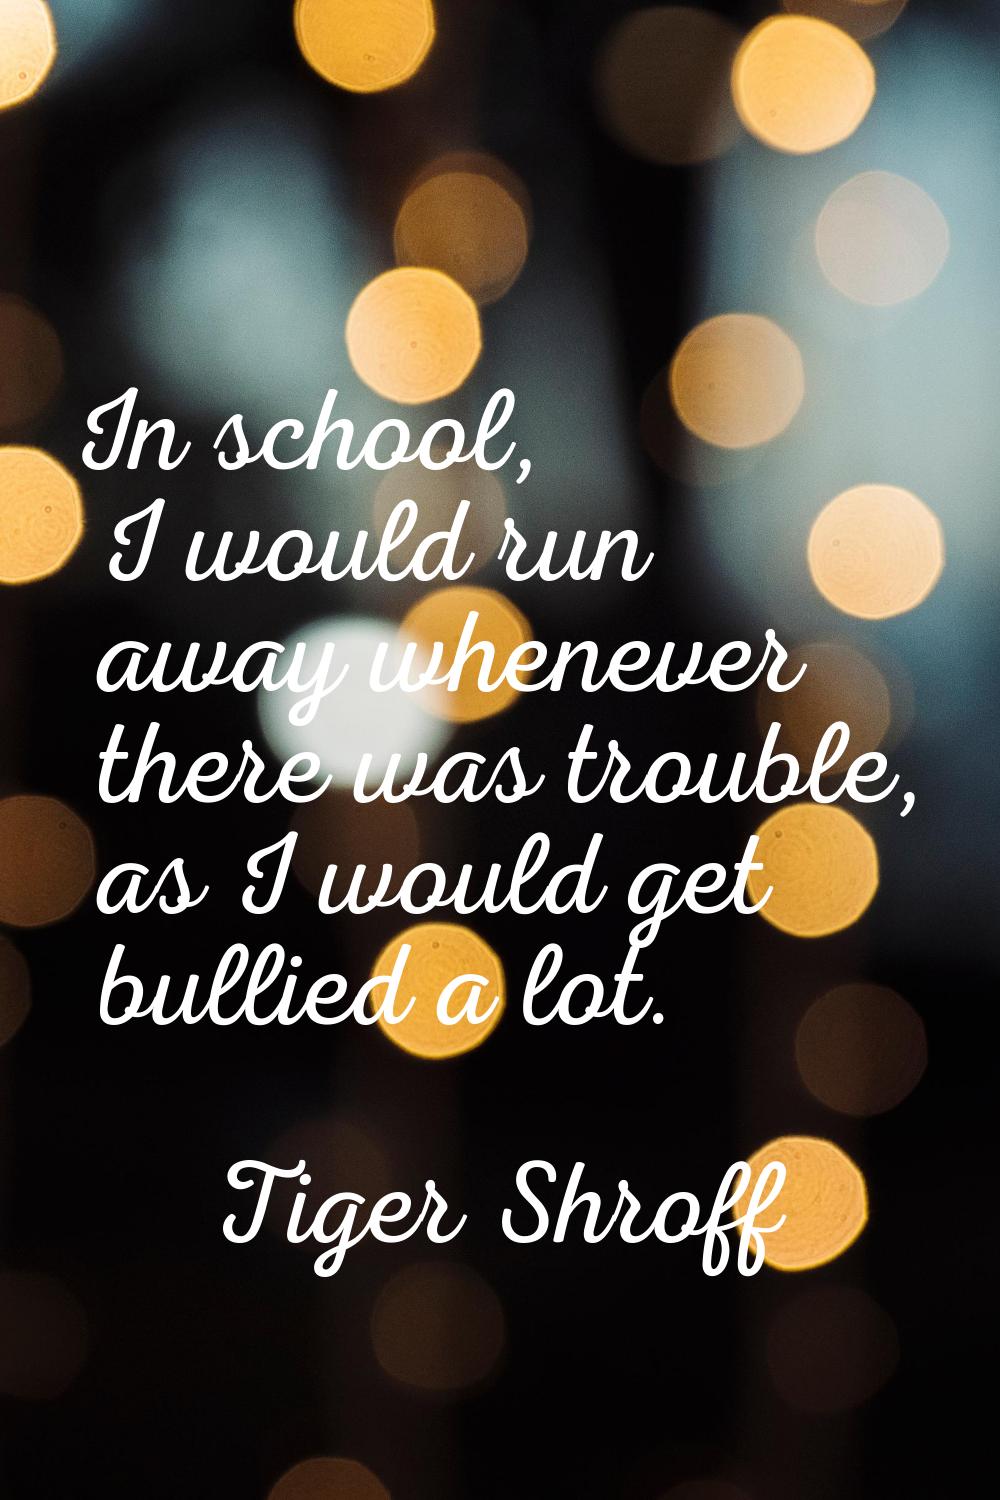 In school, I would run away whenever there was trouble, as I would get bullied a lot.